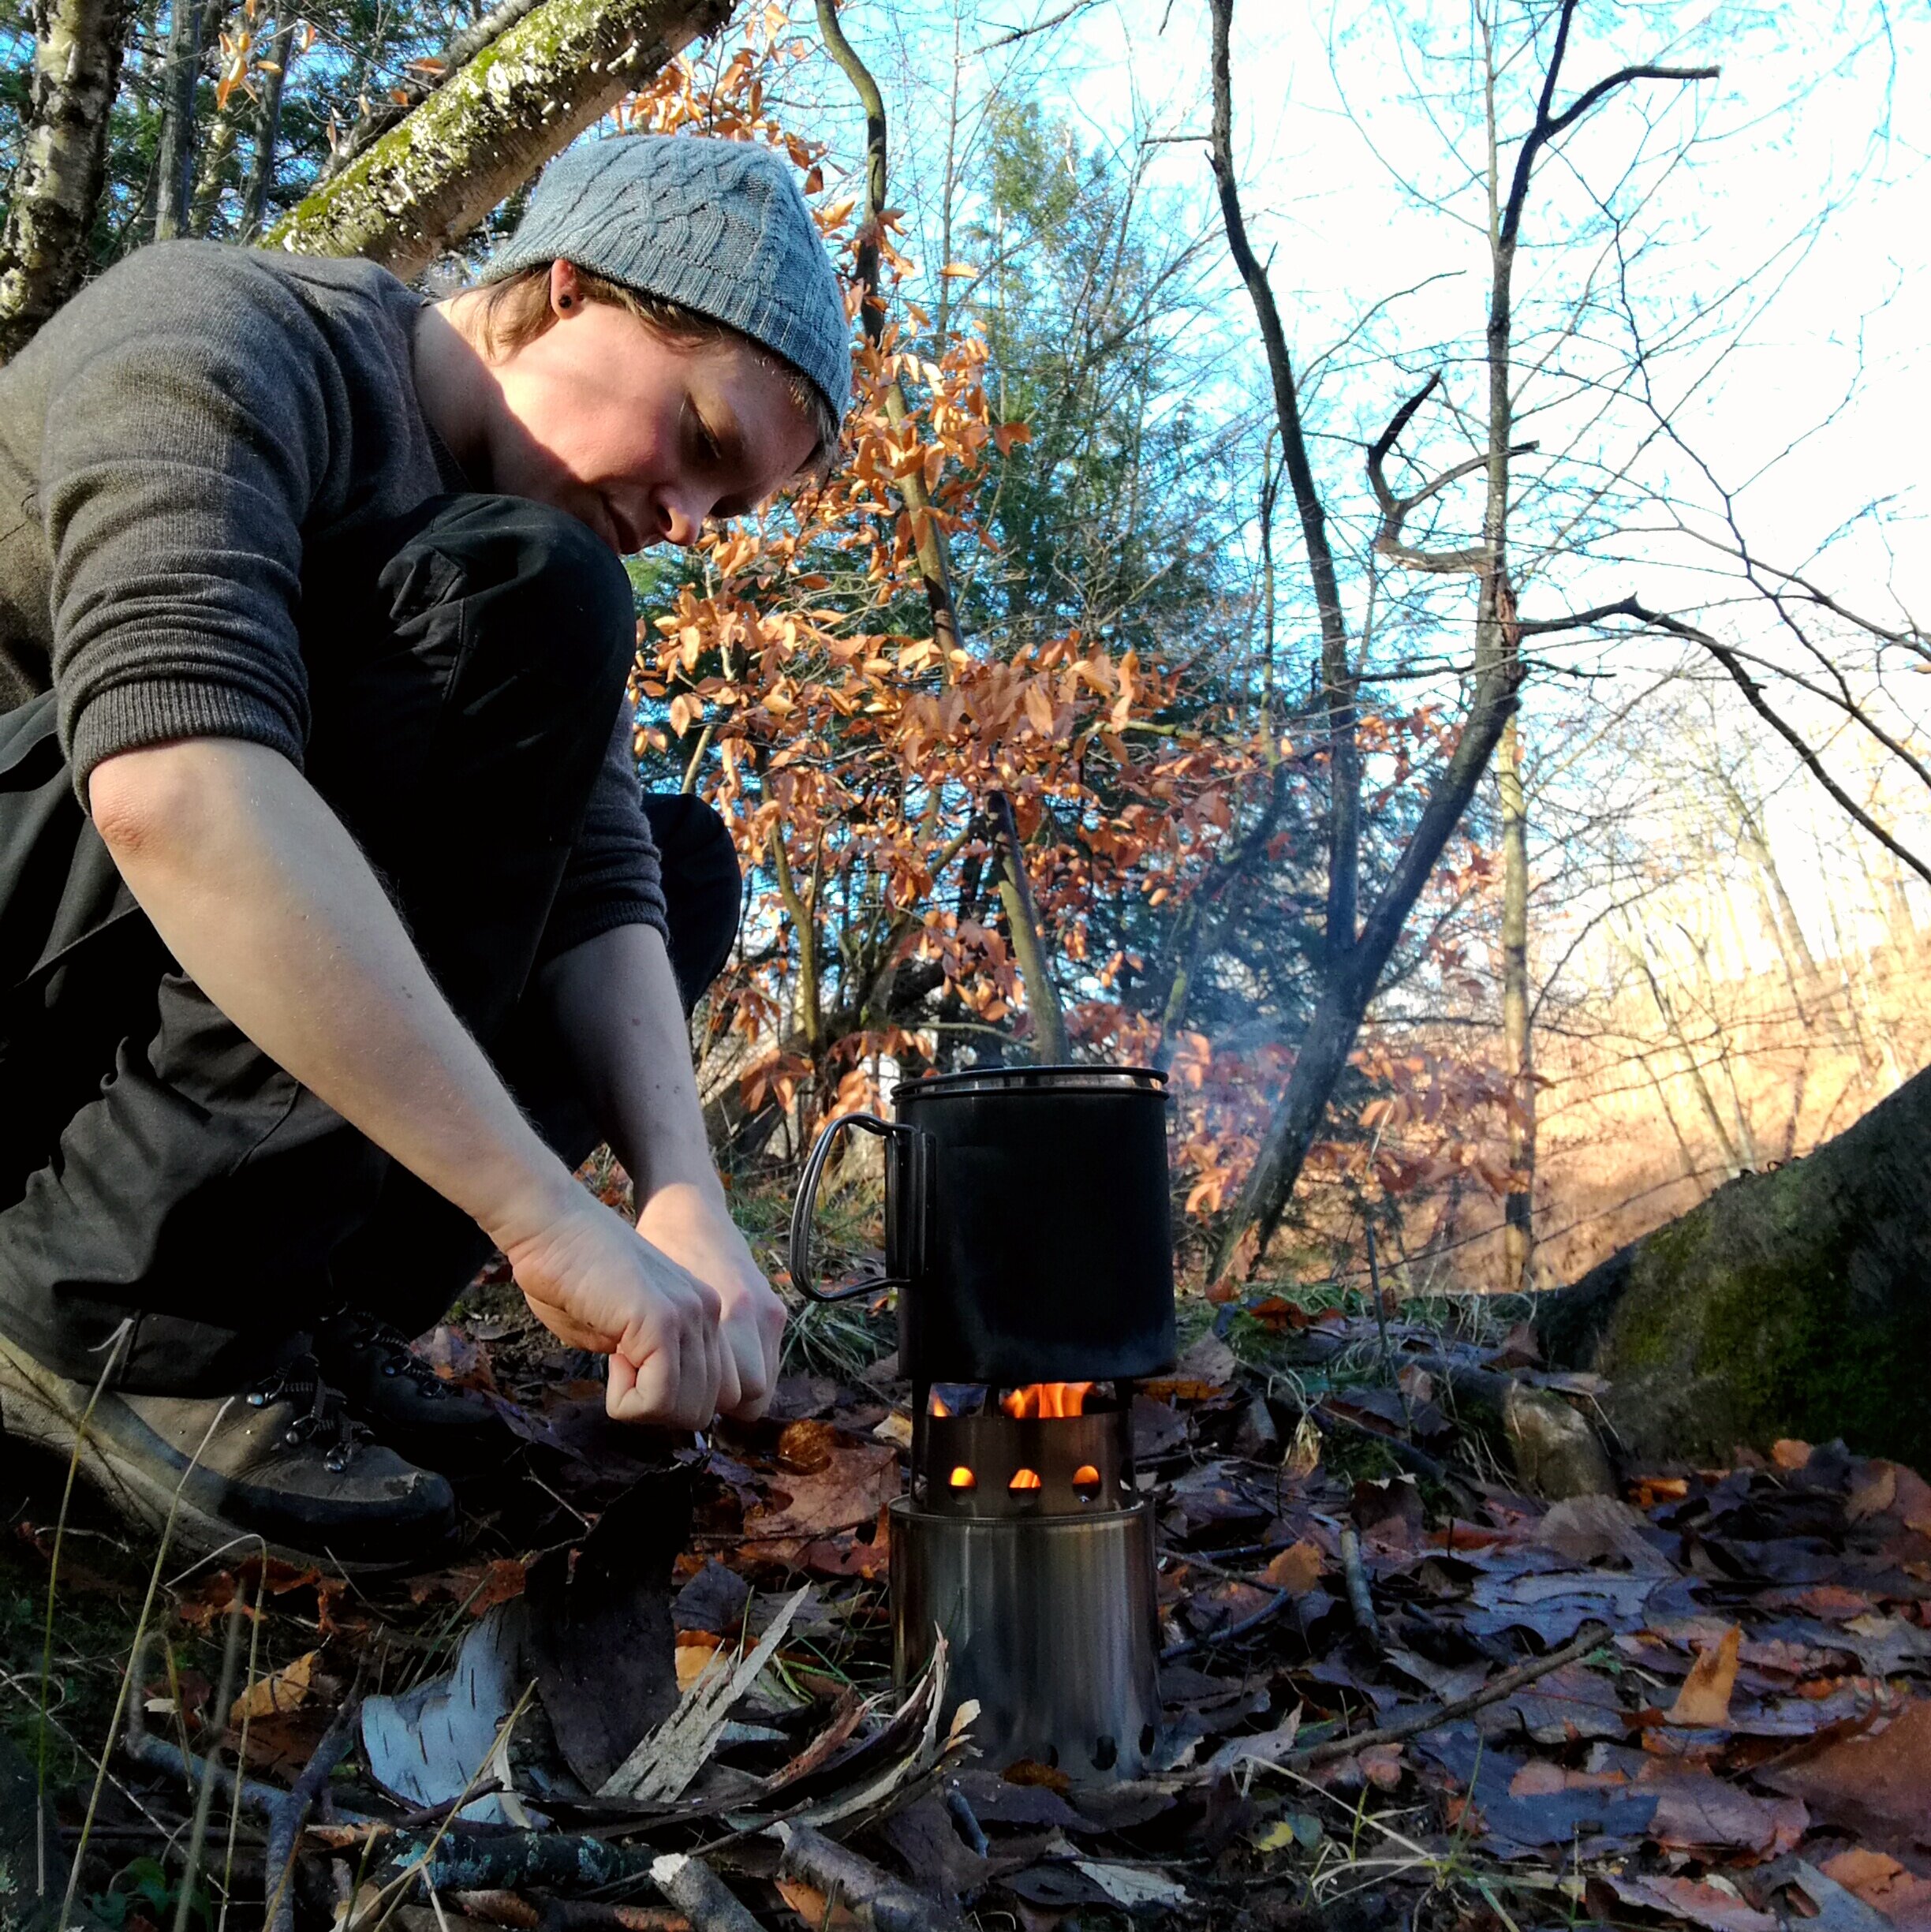 Bushcraft in a Beautiful forest! Cooking meat with potatoes under